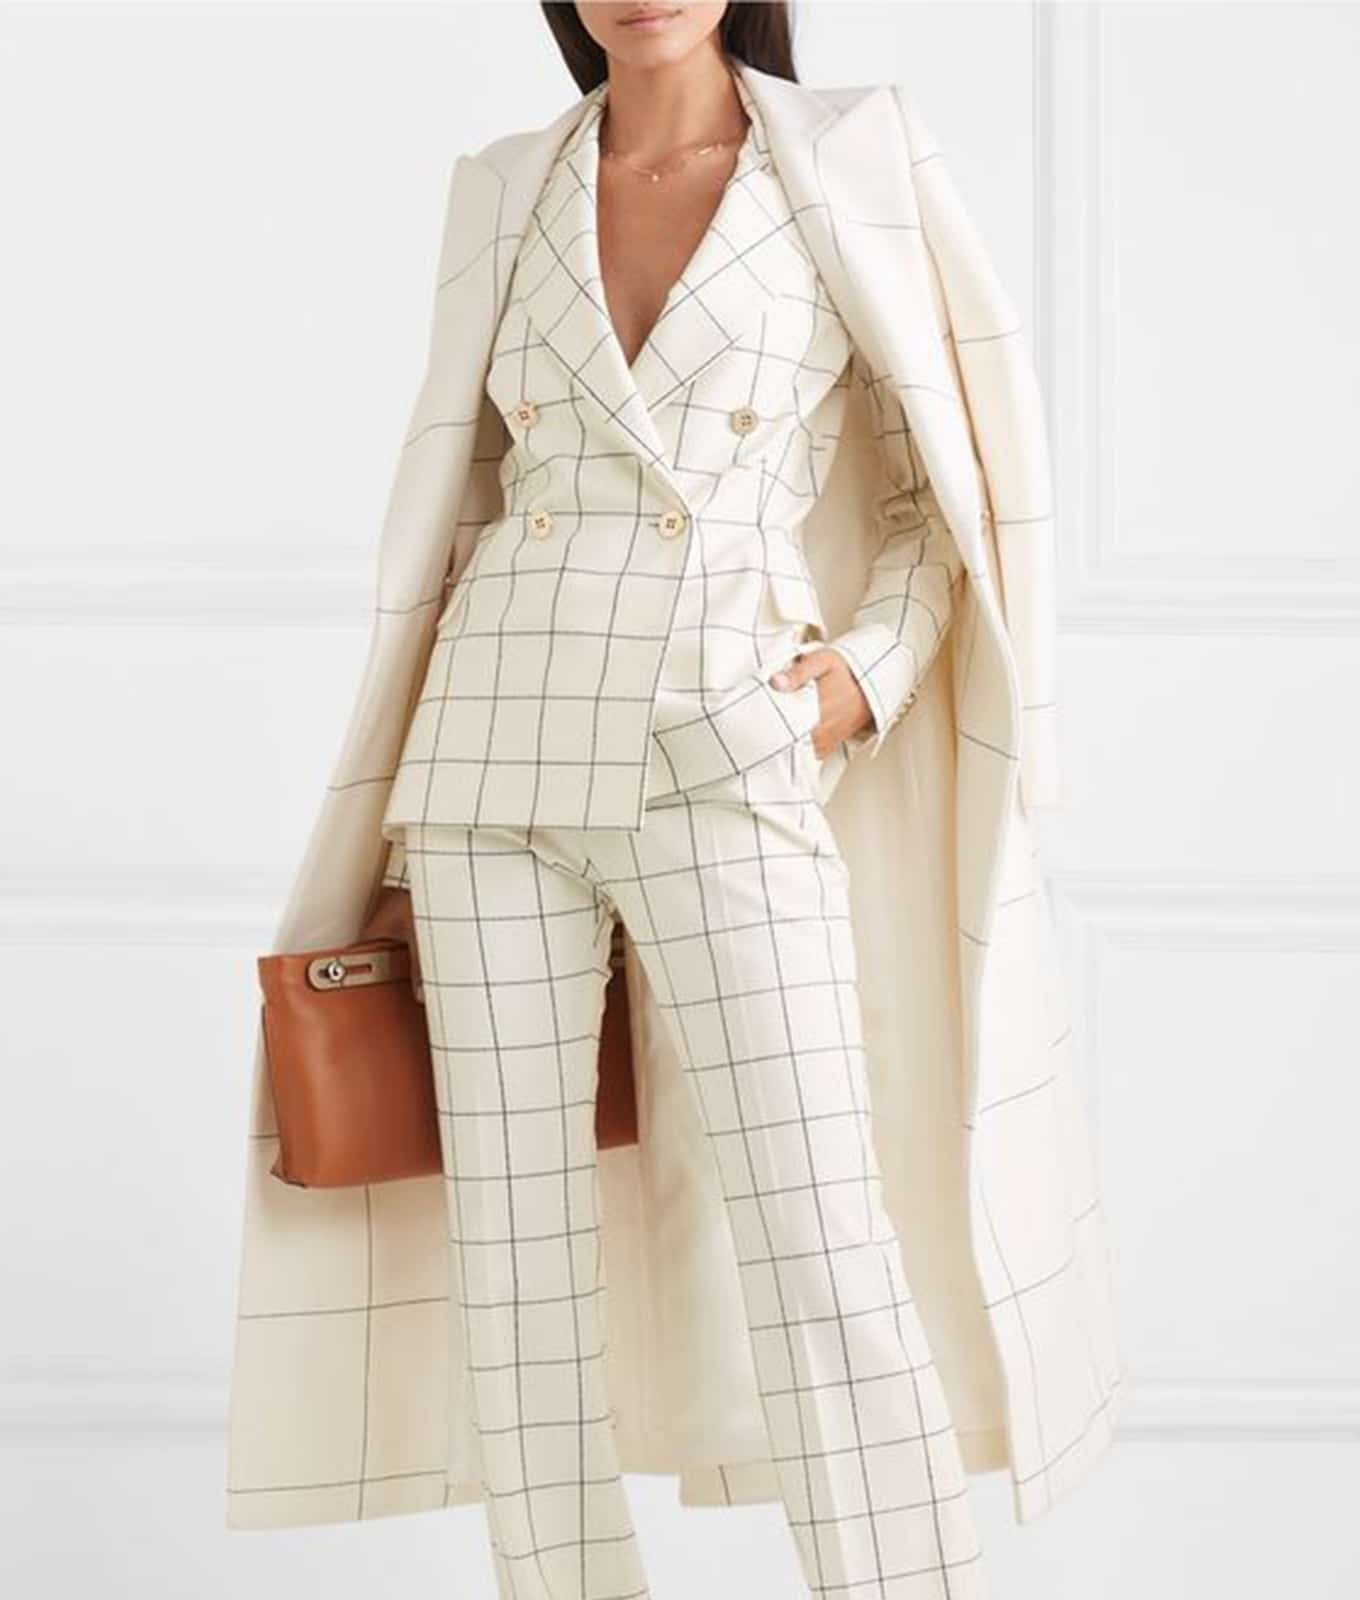 Women wearing white suit and long smart coat with a tan leather handbag.